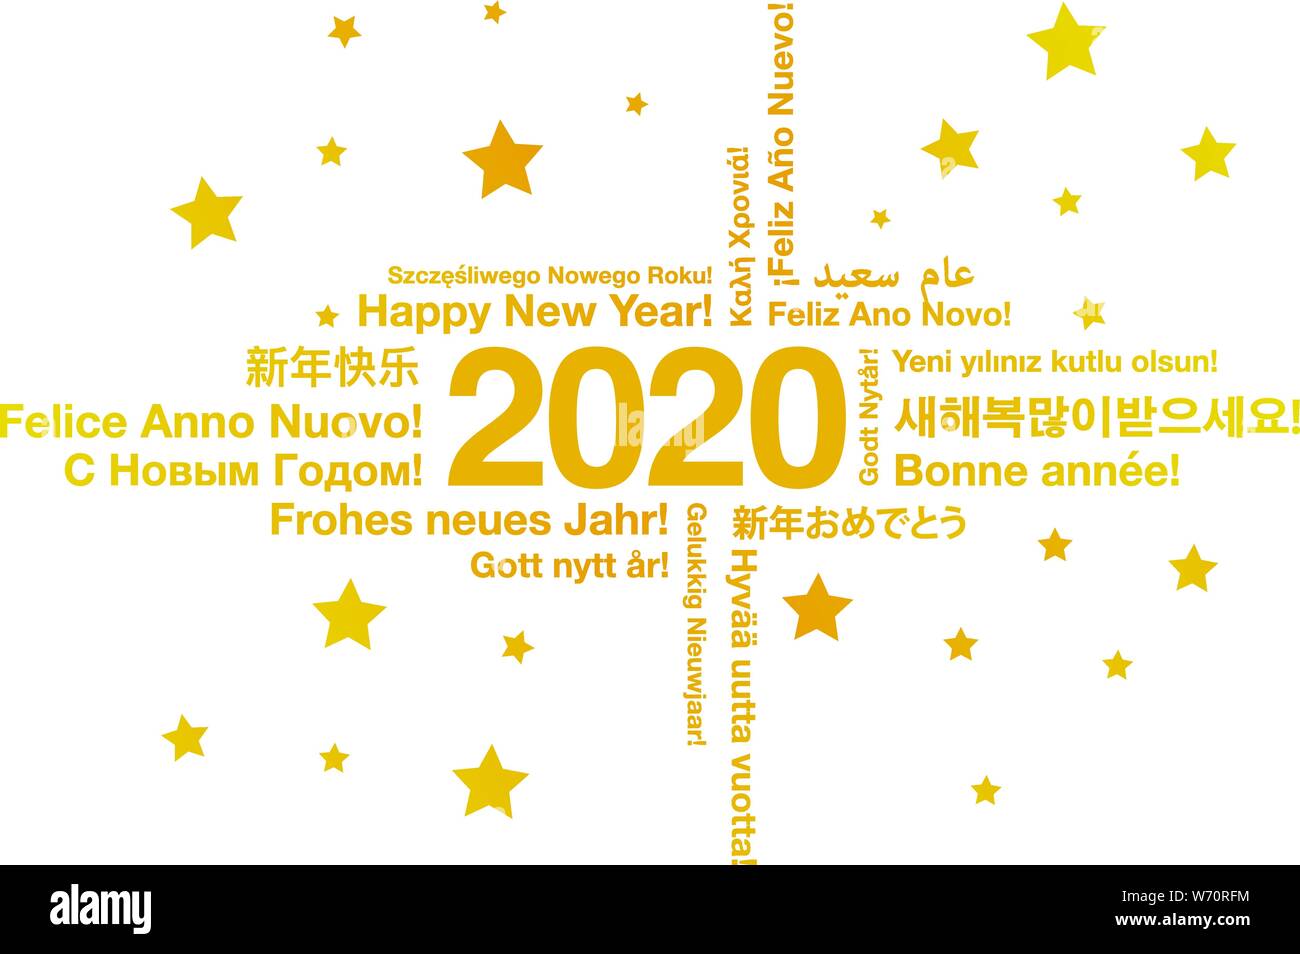 Happy New Year 2020 in different languages greeting card concept Stock Vector